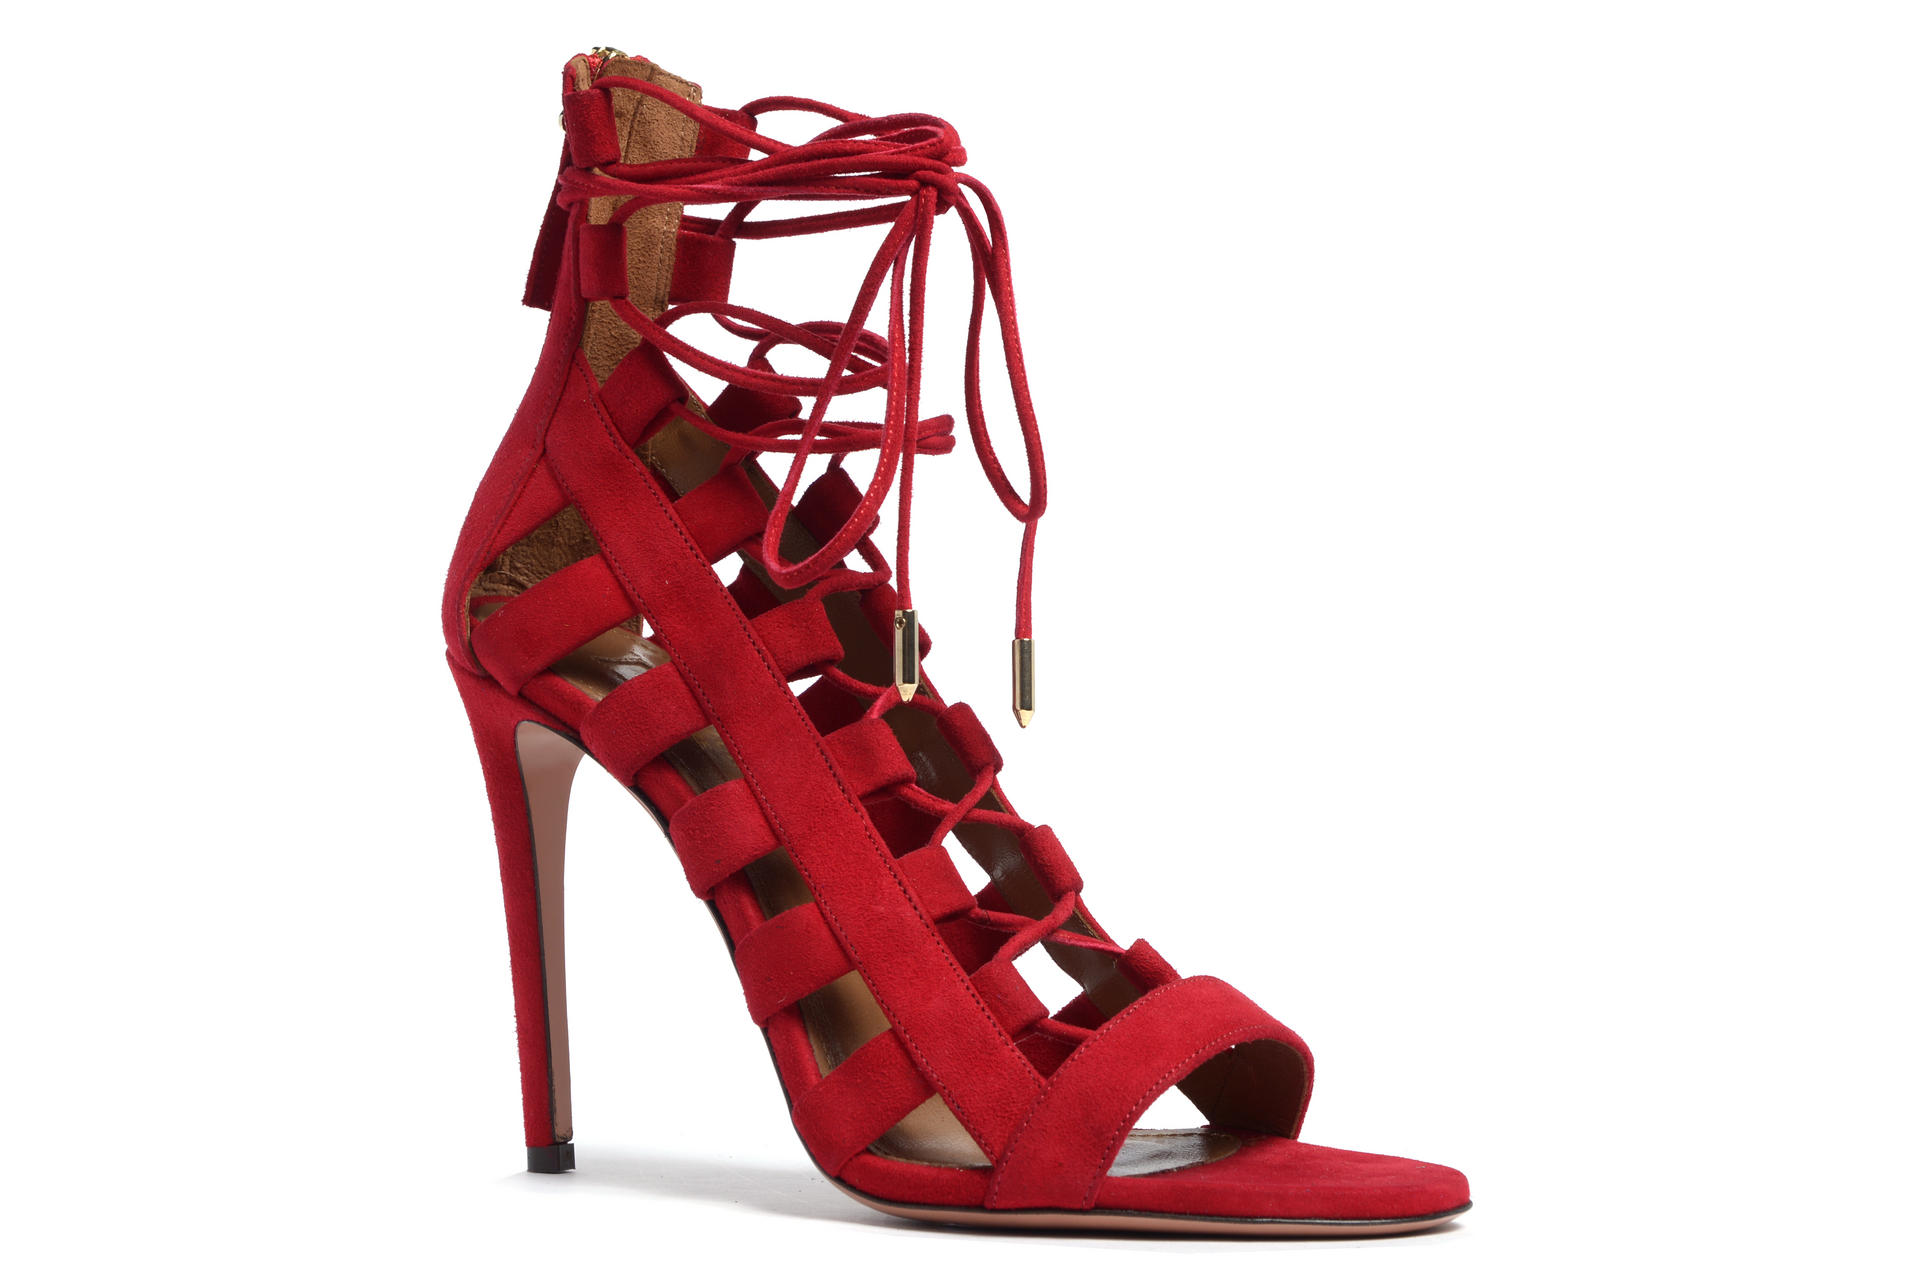 Shoe designer Edgardo Osorio gets personal with winter collection for ...